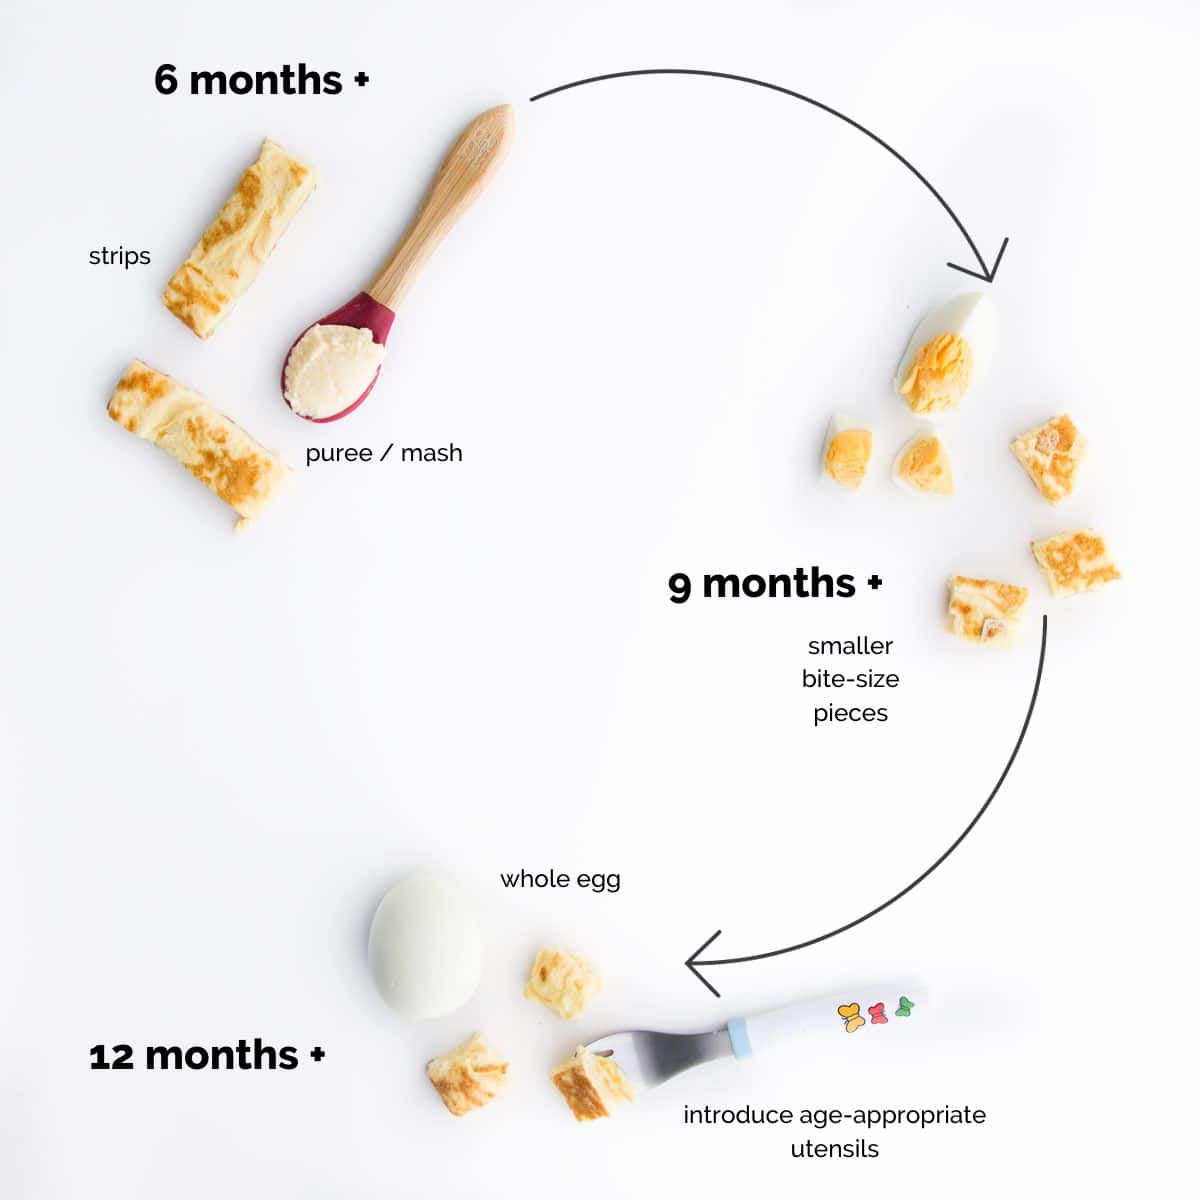 Image Showing How to Serve Eggs Baby Led Weaning by Age. 6 months Pureed Egg on Spoon and Omelette Strips. 9 Months Hard Boiled Egg Pieces and Omelette Pieces. 12 Months Whole Egg and Egg Pieces with Fork.